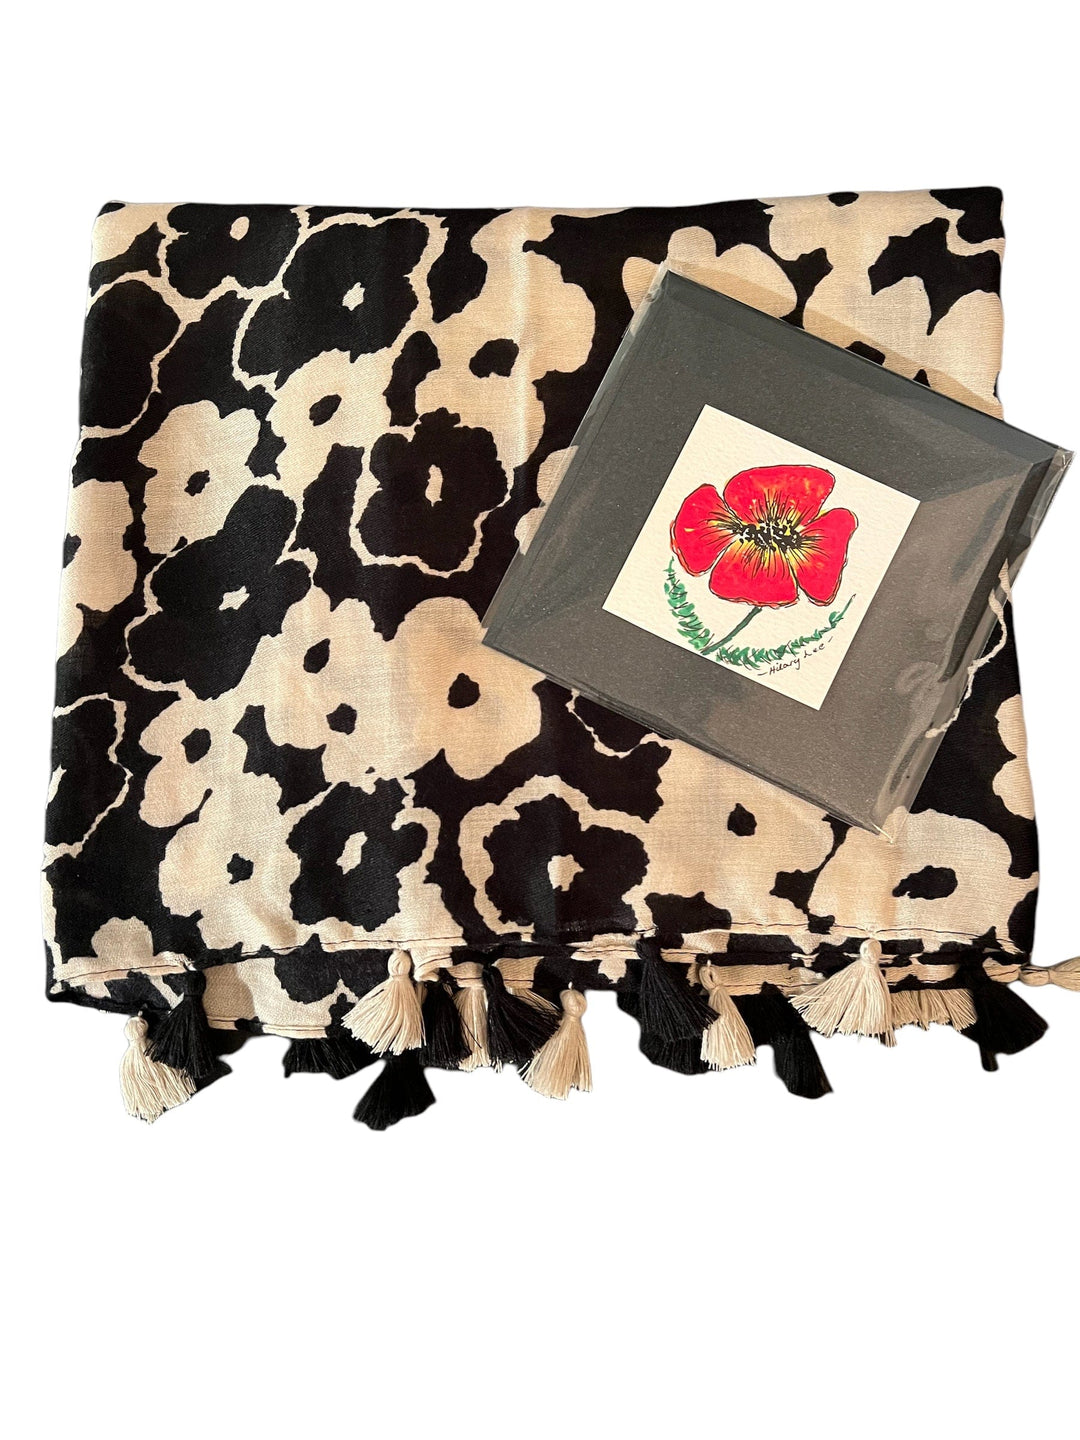 Scarves Australia Gift Packs Floral Scarf - Black Beige -Poppy Contemporary +Gift Card